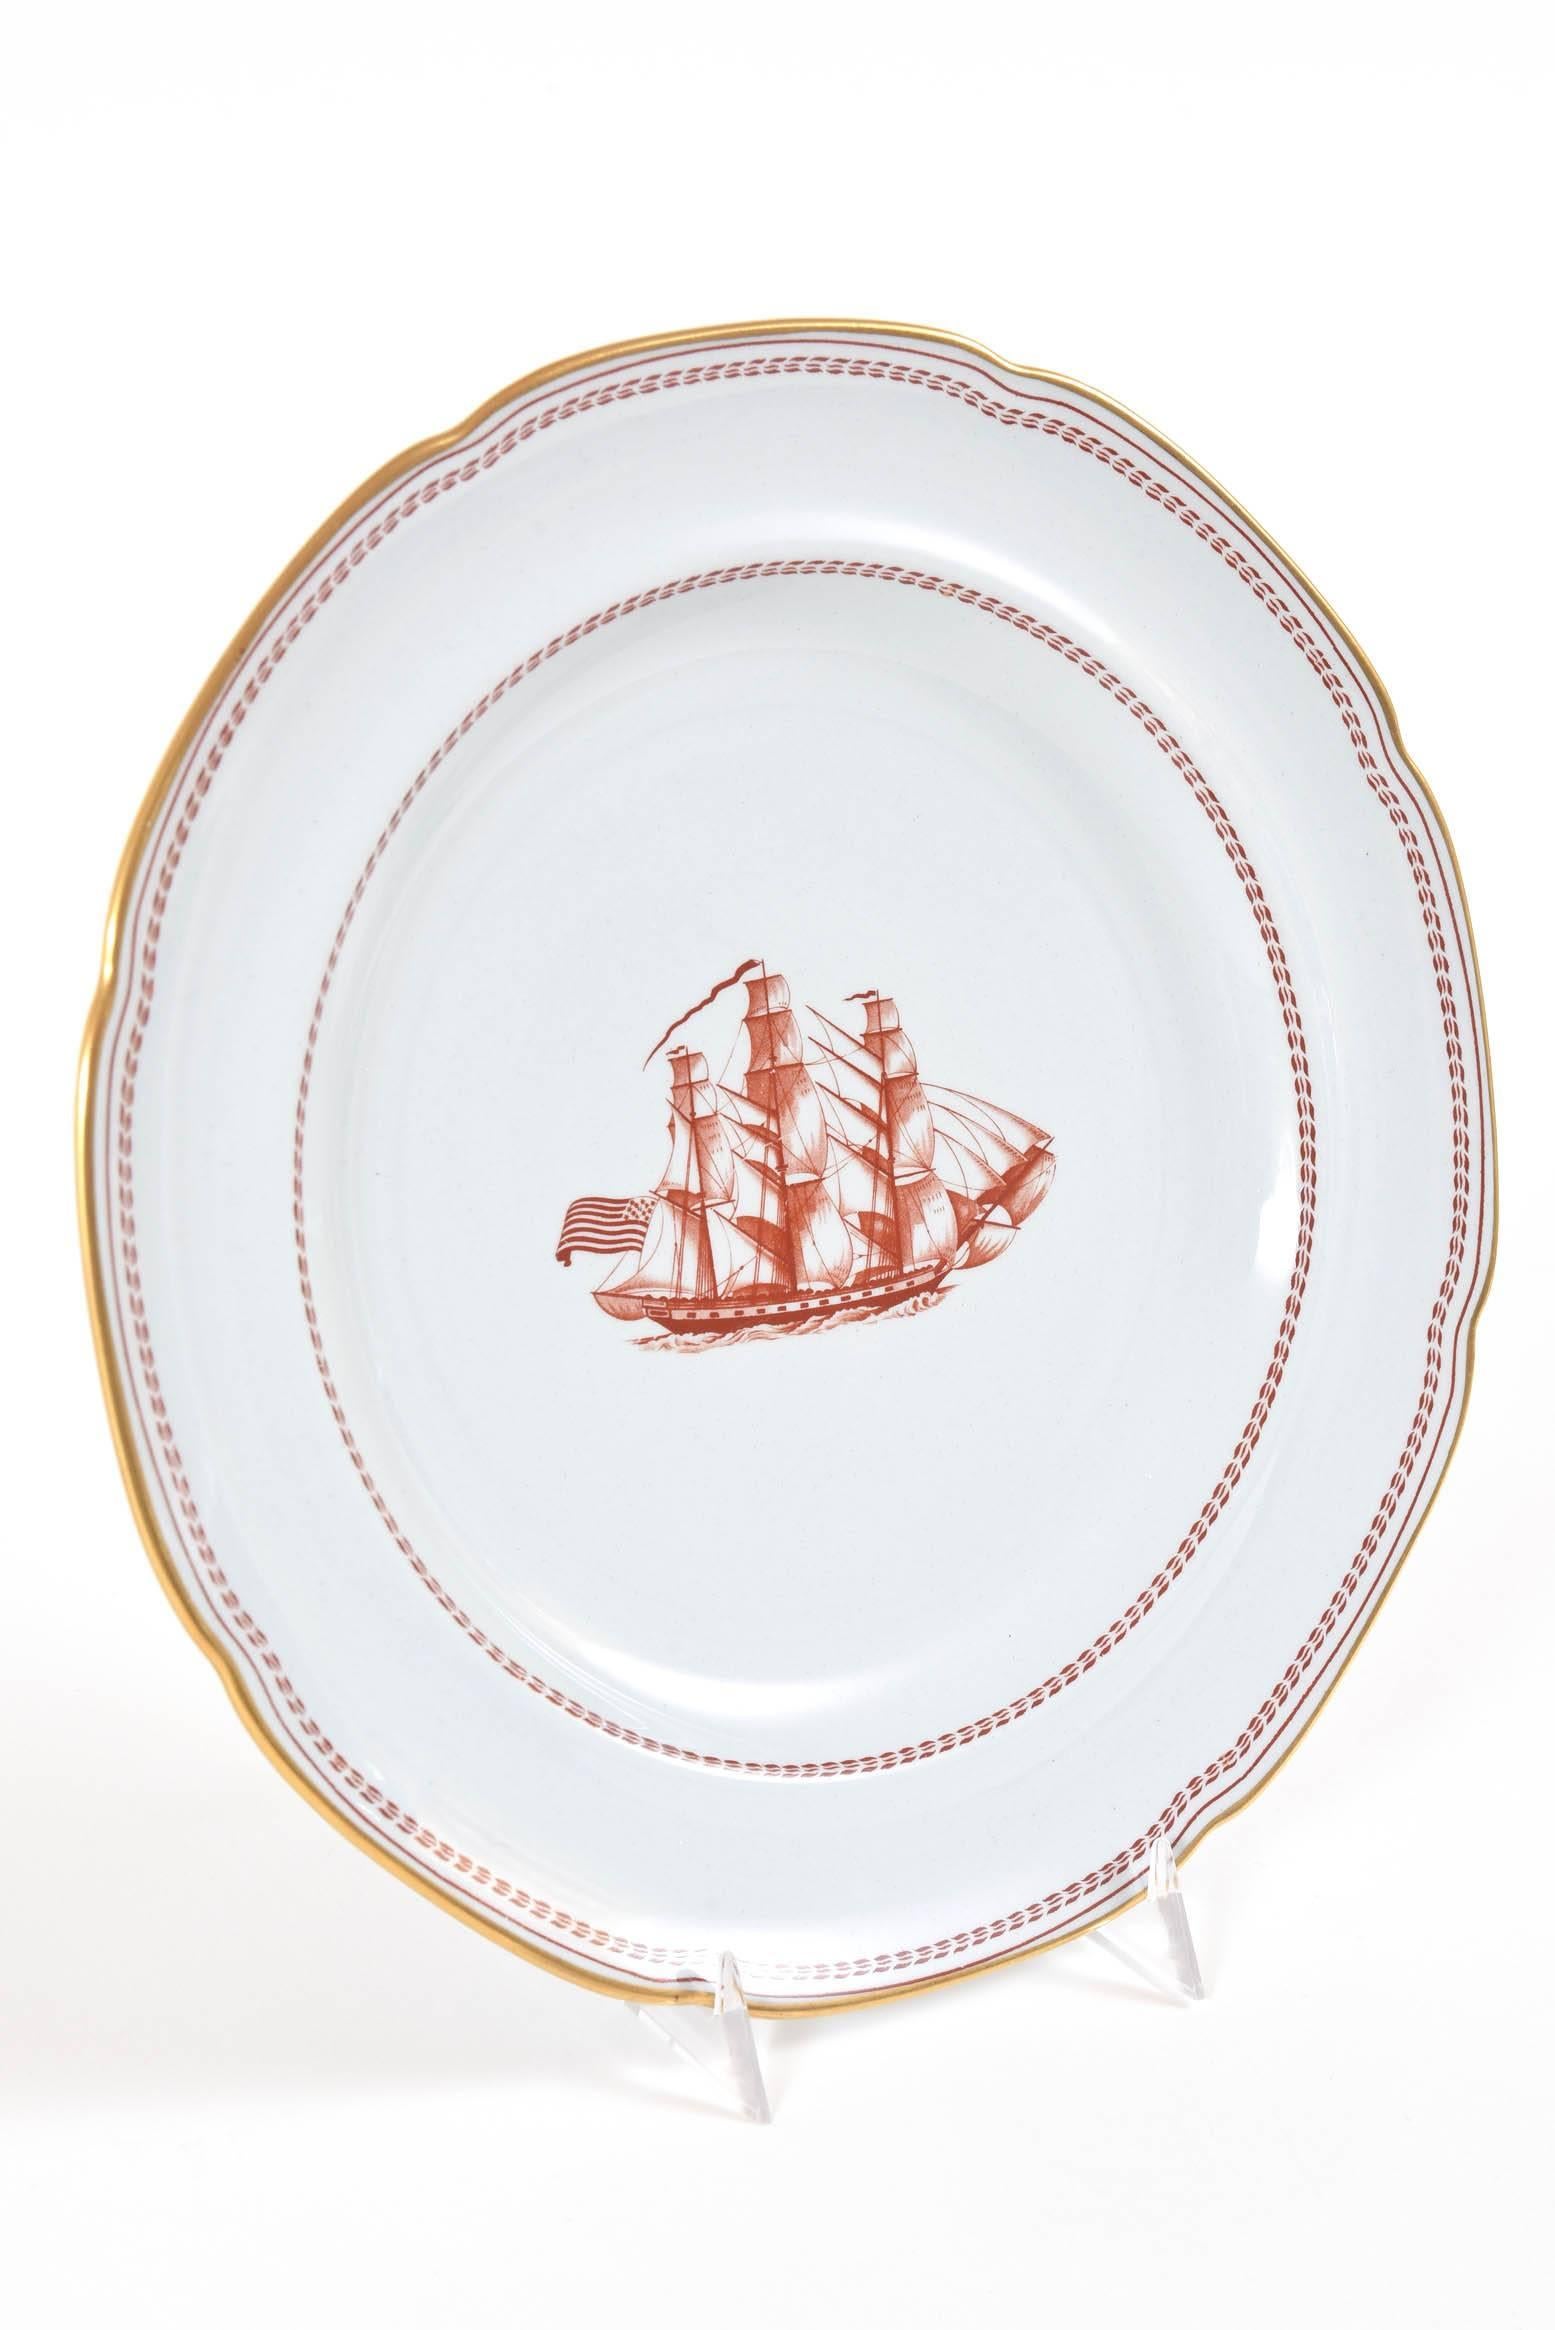 British Dinner Plate in Spode Tradewinds in Red, Gold Trimmed, Vintage, circa 1960s